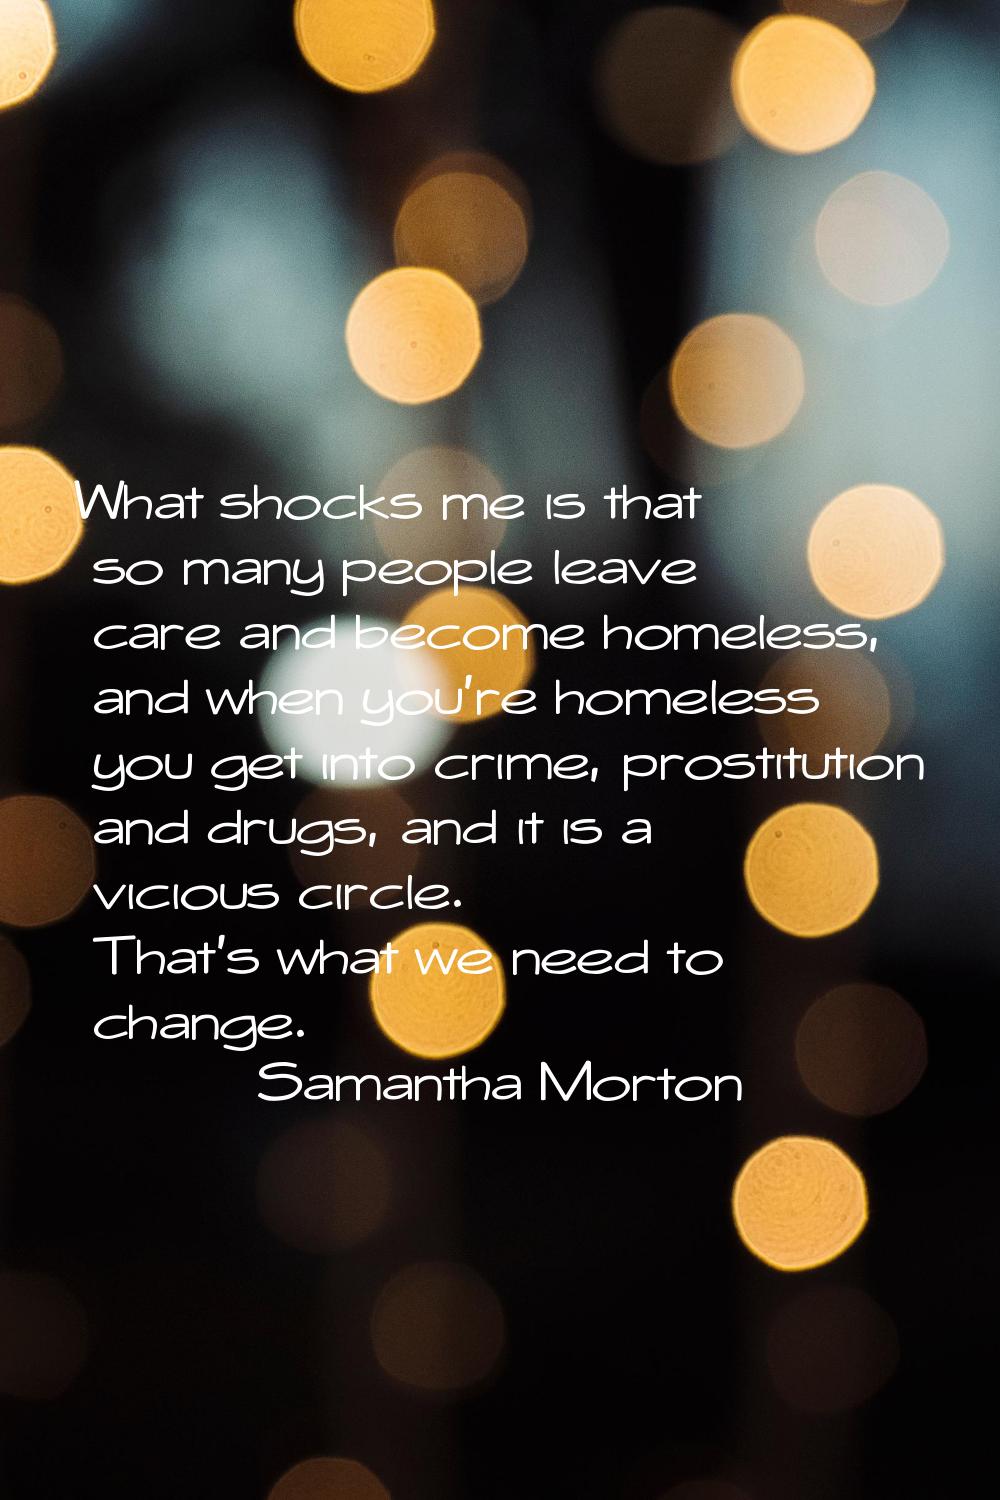 What shocks me is that so many people leave care and become homeless, and when you're homeless you 